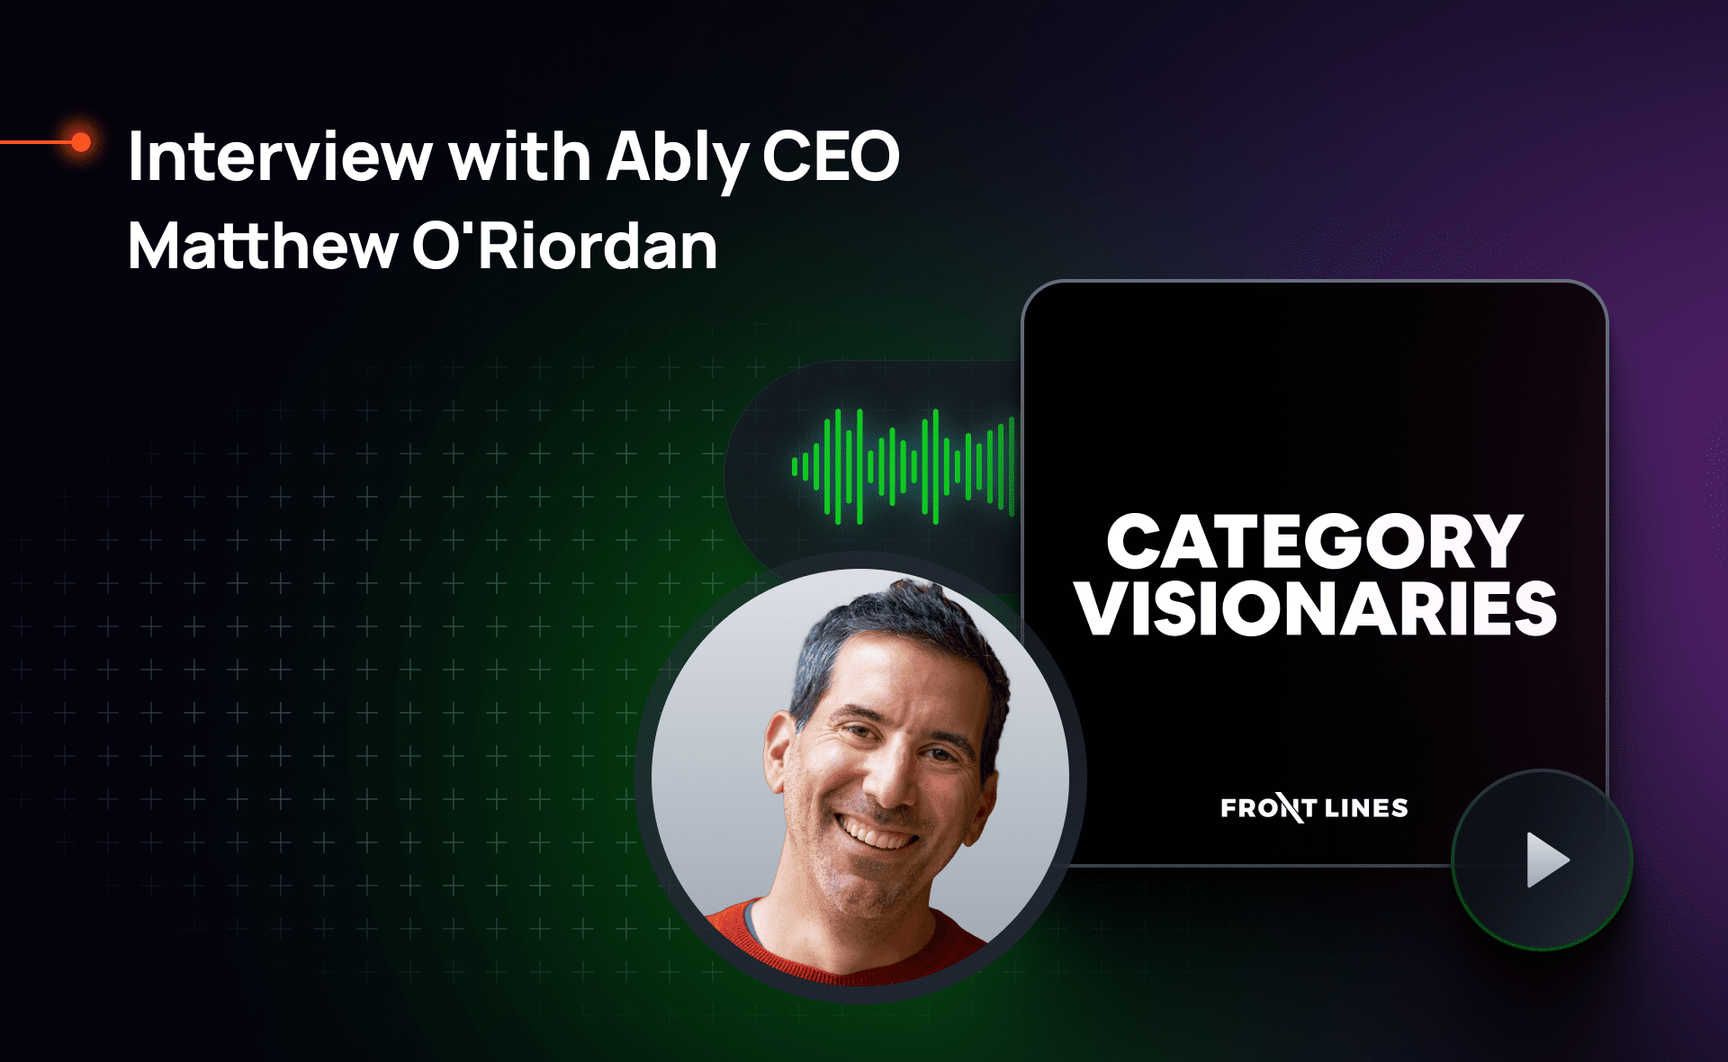 5 takeaways from Matthew O’Riordan’s chat on the Category Visionaries podcast